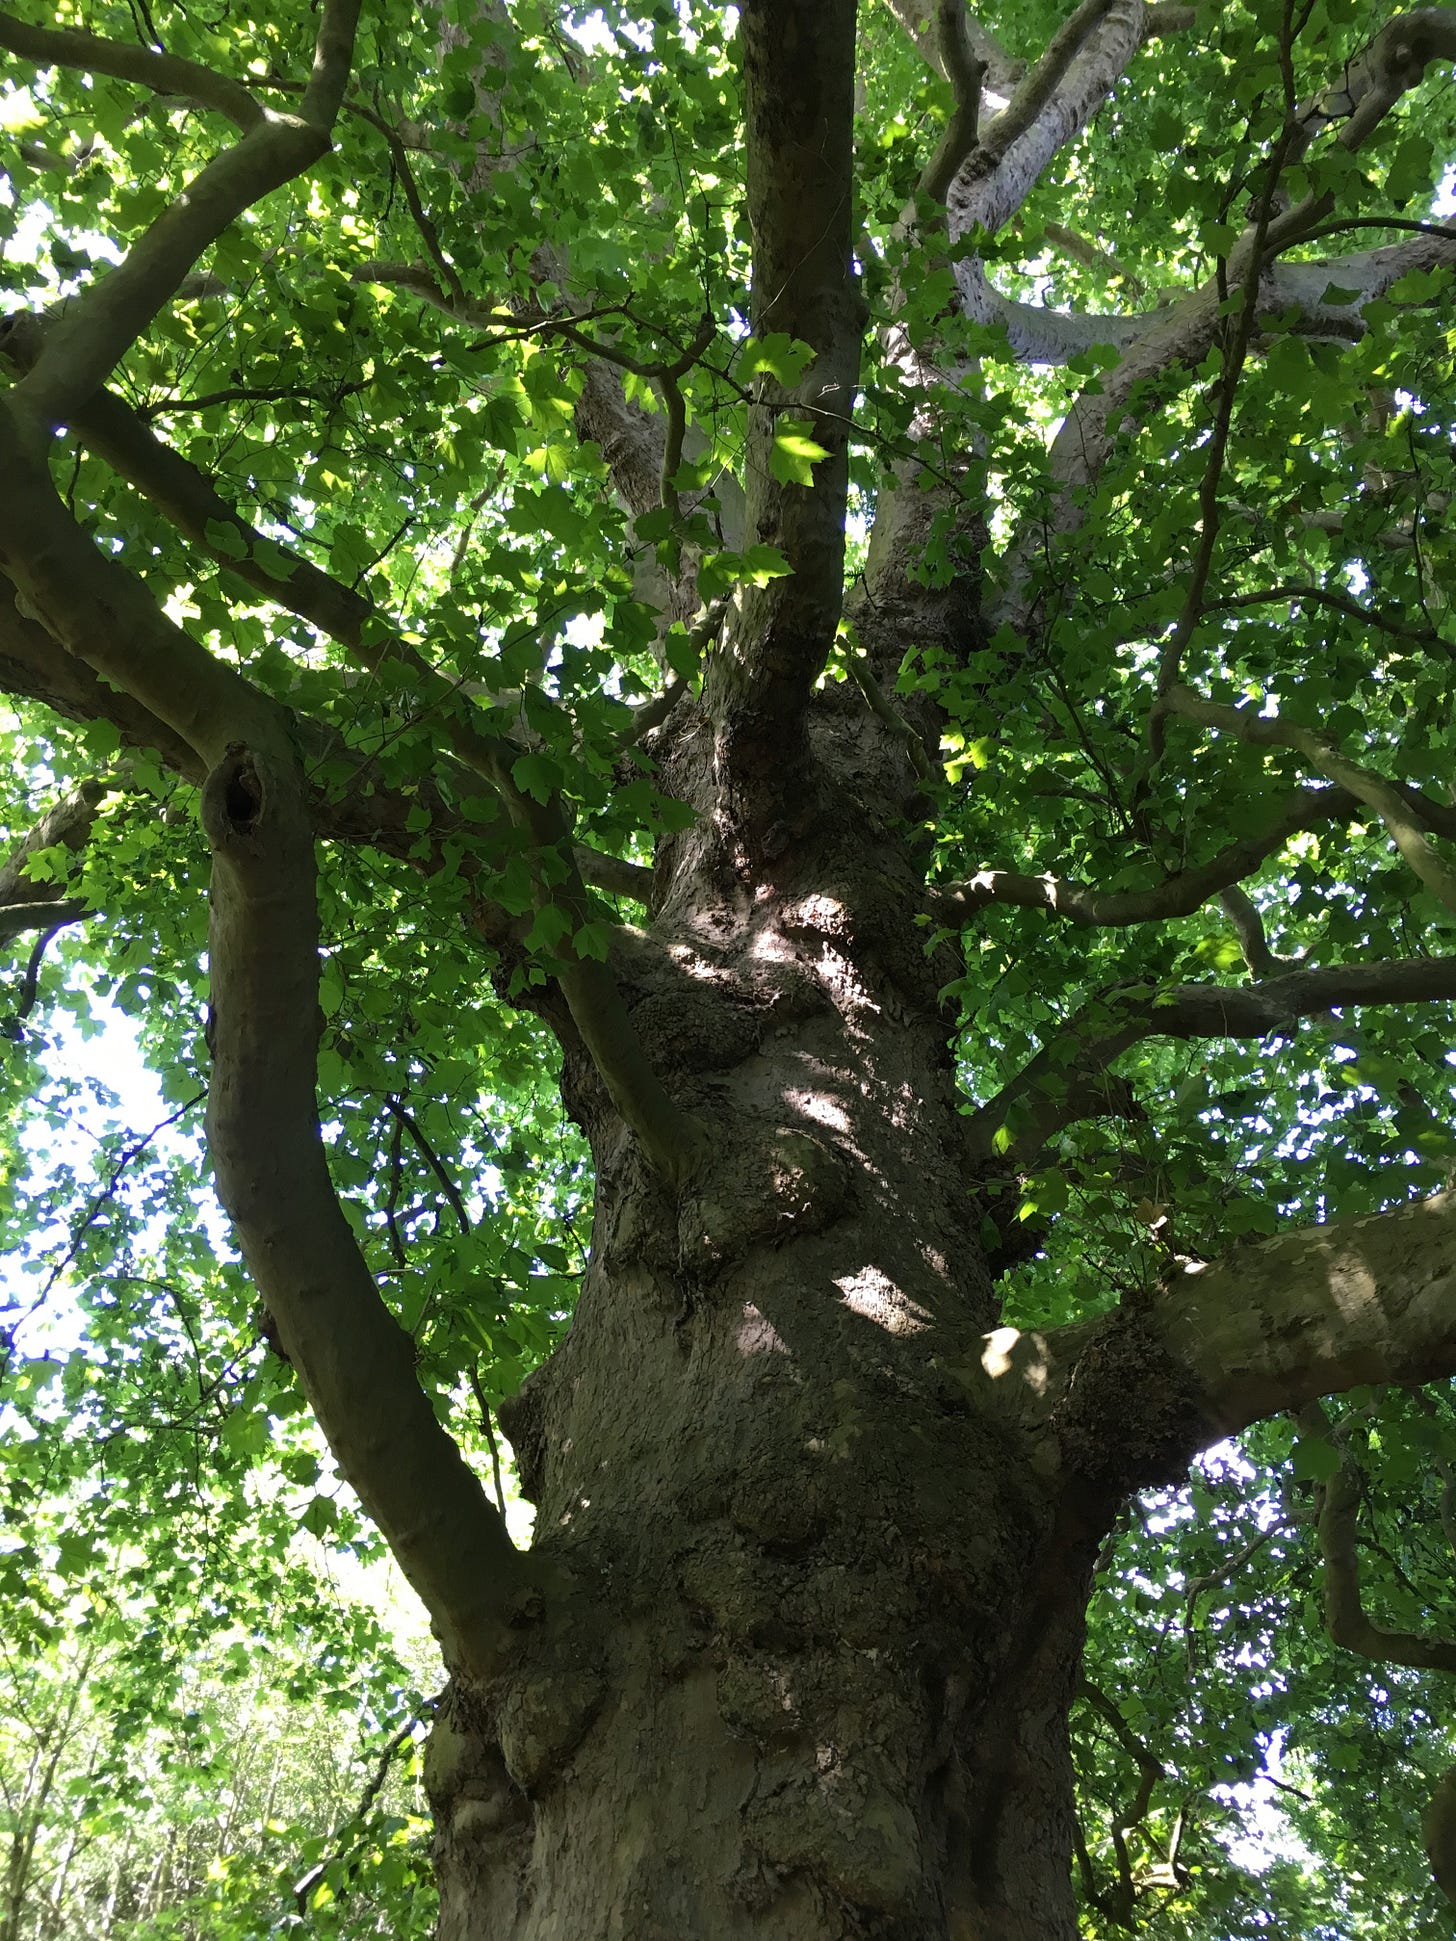 Looking up into a beautiful old oak tree in full leaf, sun shining through the canopy